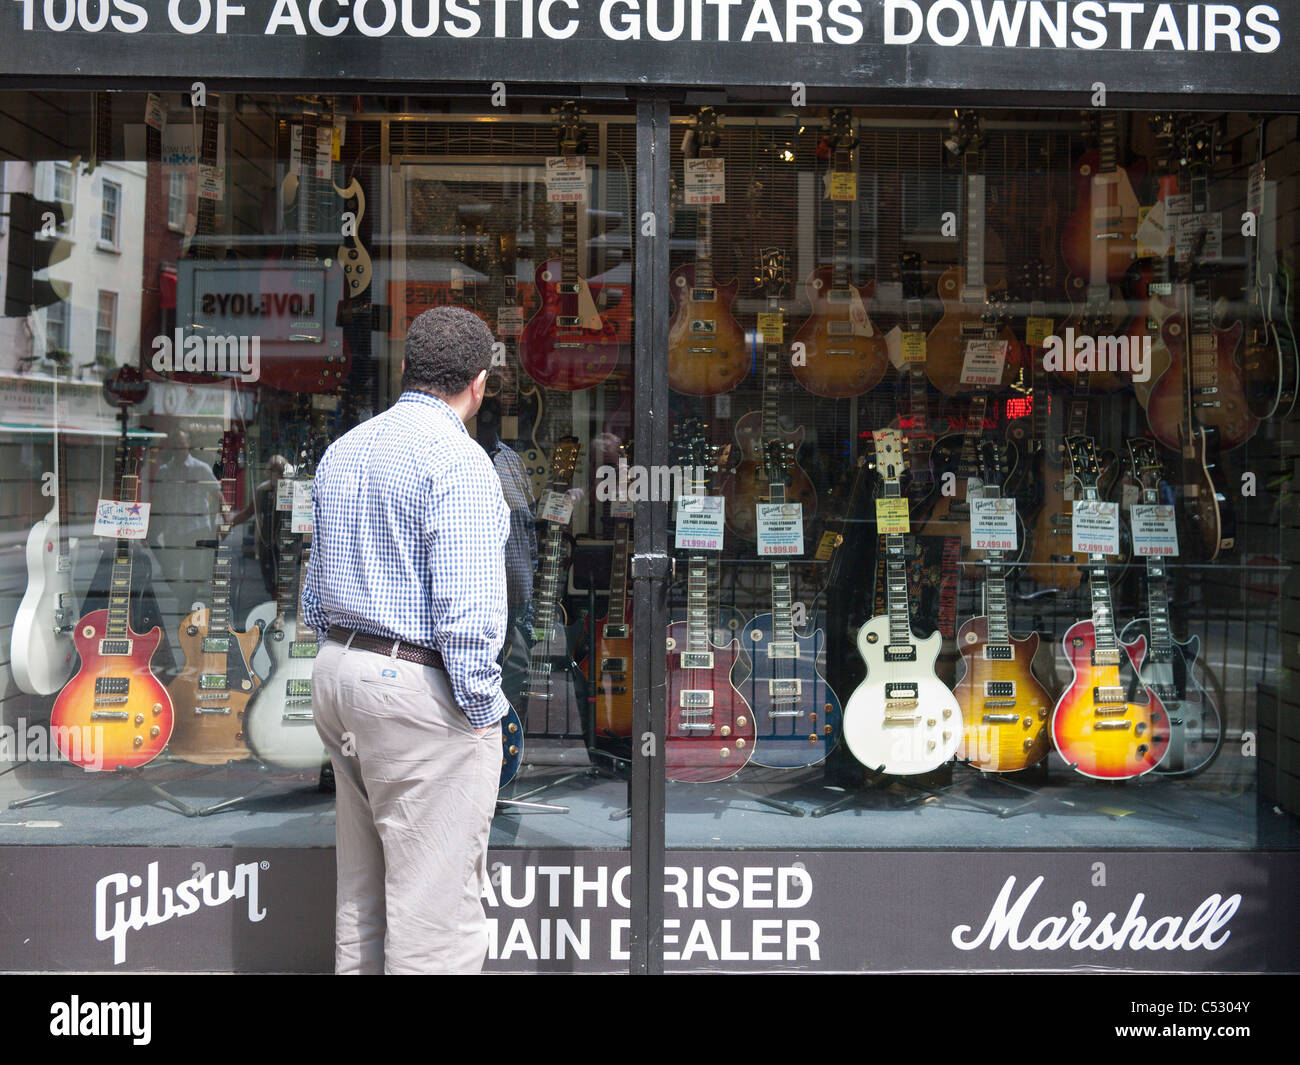 Looking at Gibson guitars in music shop window in Tottenham Court Road, London, England Stock Photo